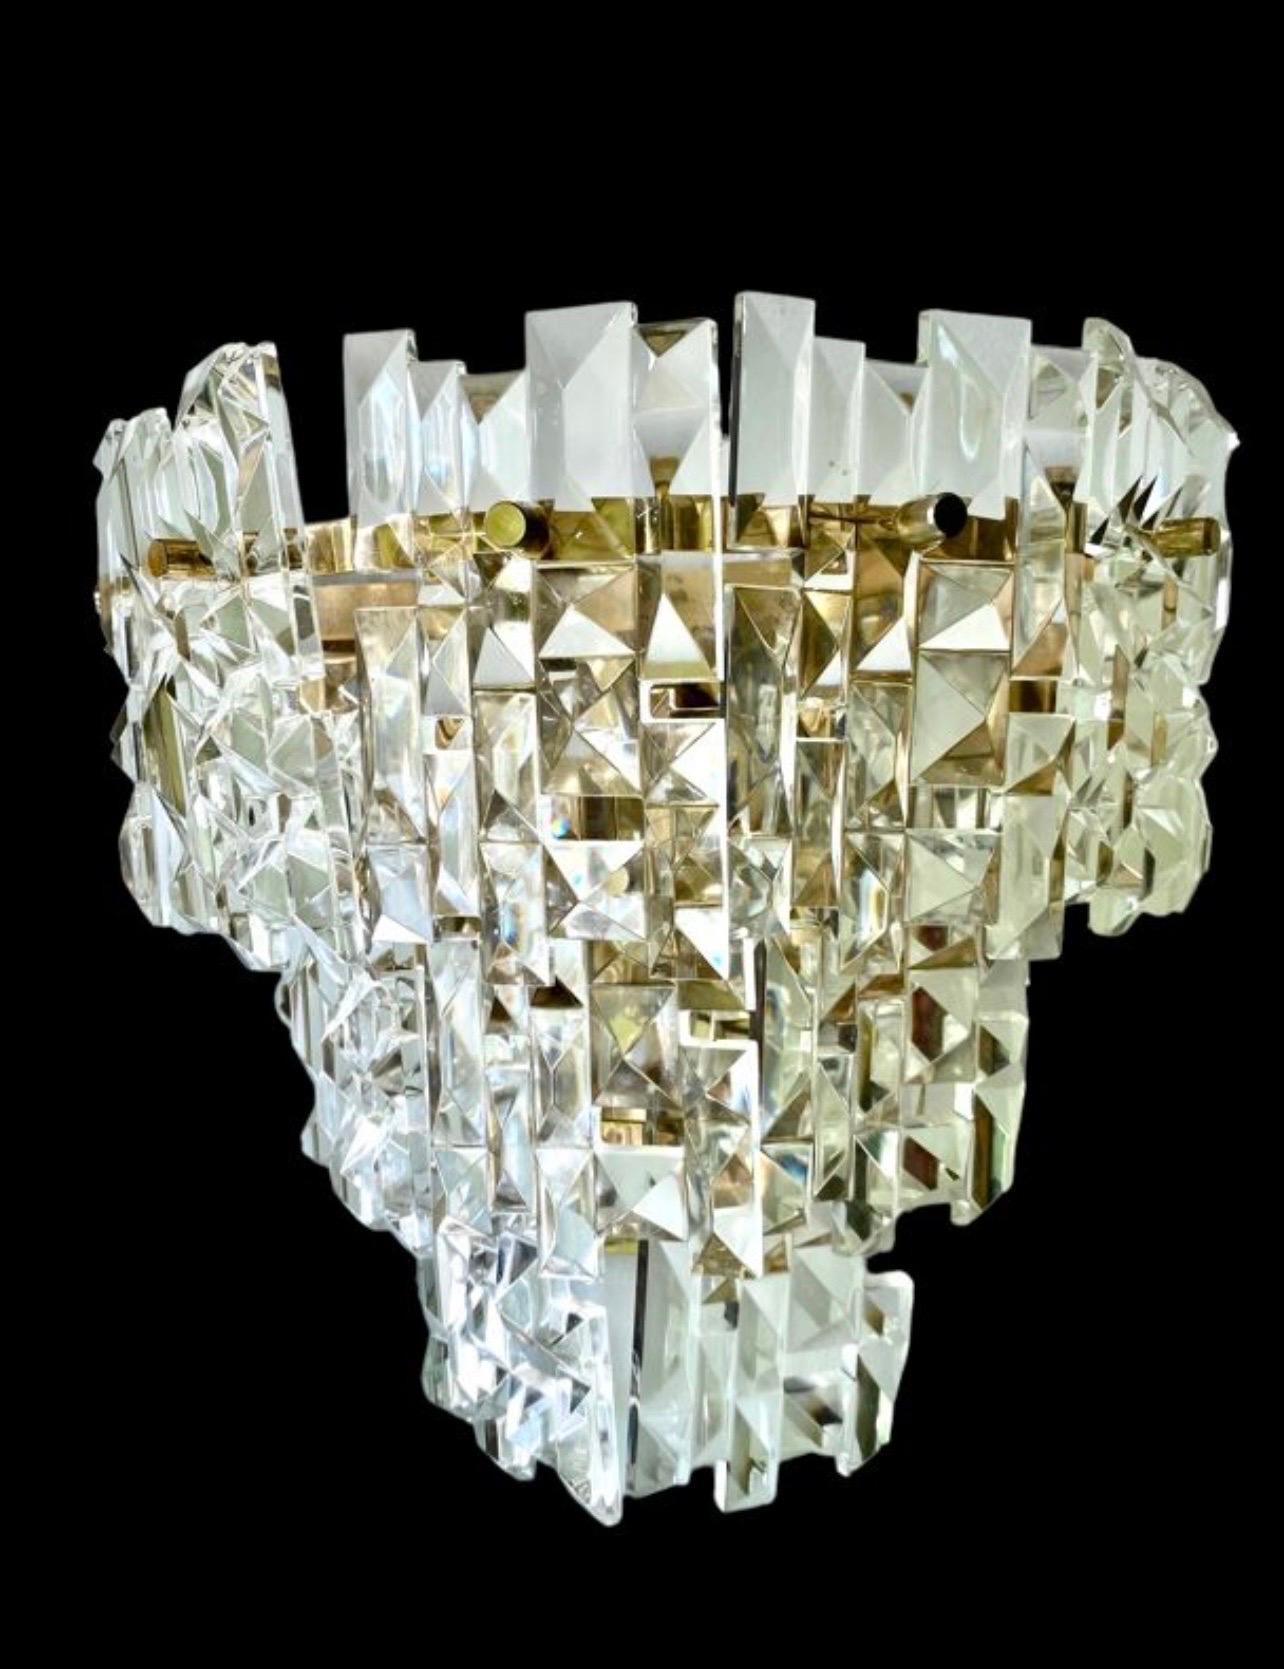 Austria pair wall lighting cut glass. The design and the quality of the glass make this piece the best of the Austrian design.

discount shipping to USA * shipping option private quote

This artistic glass piece features the exclusive design of an